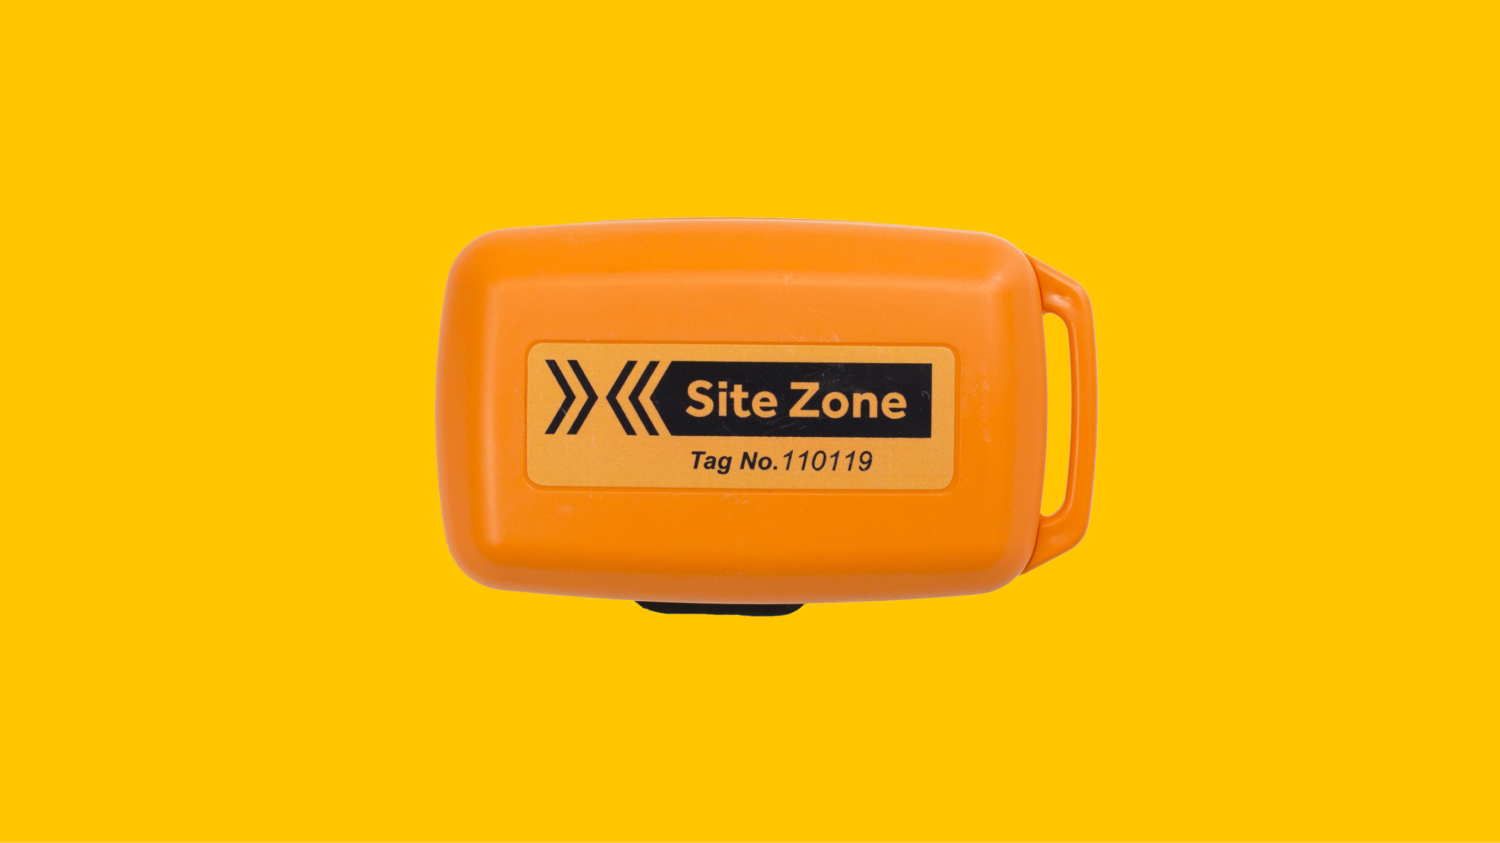 The SiteZone tag